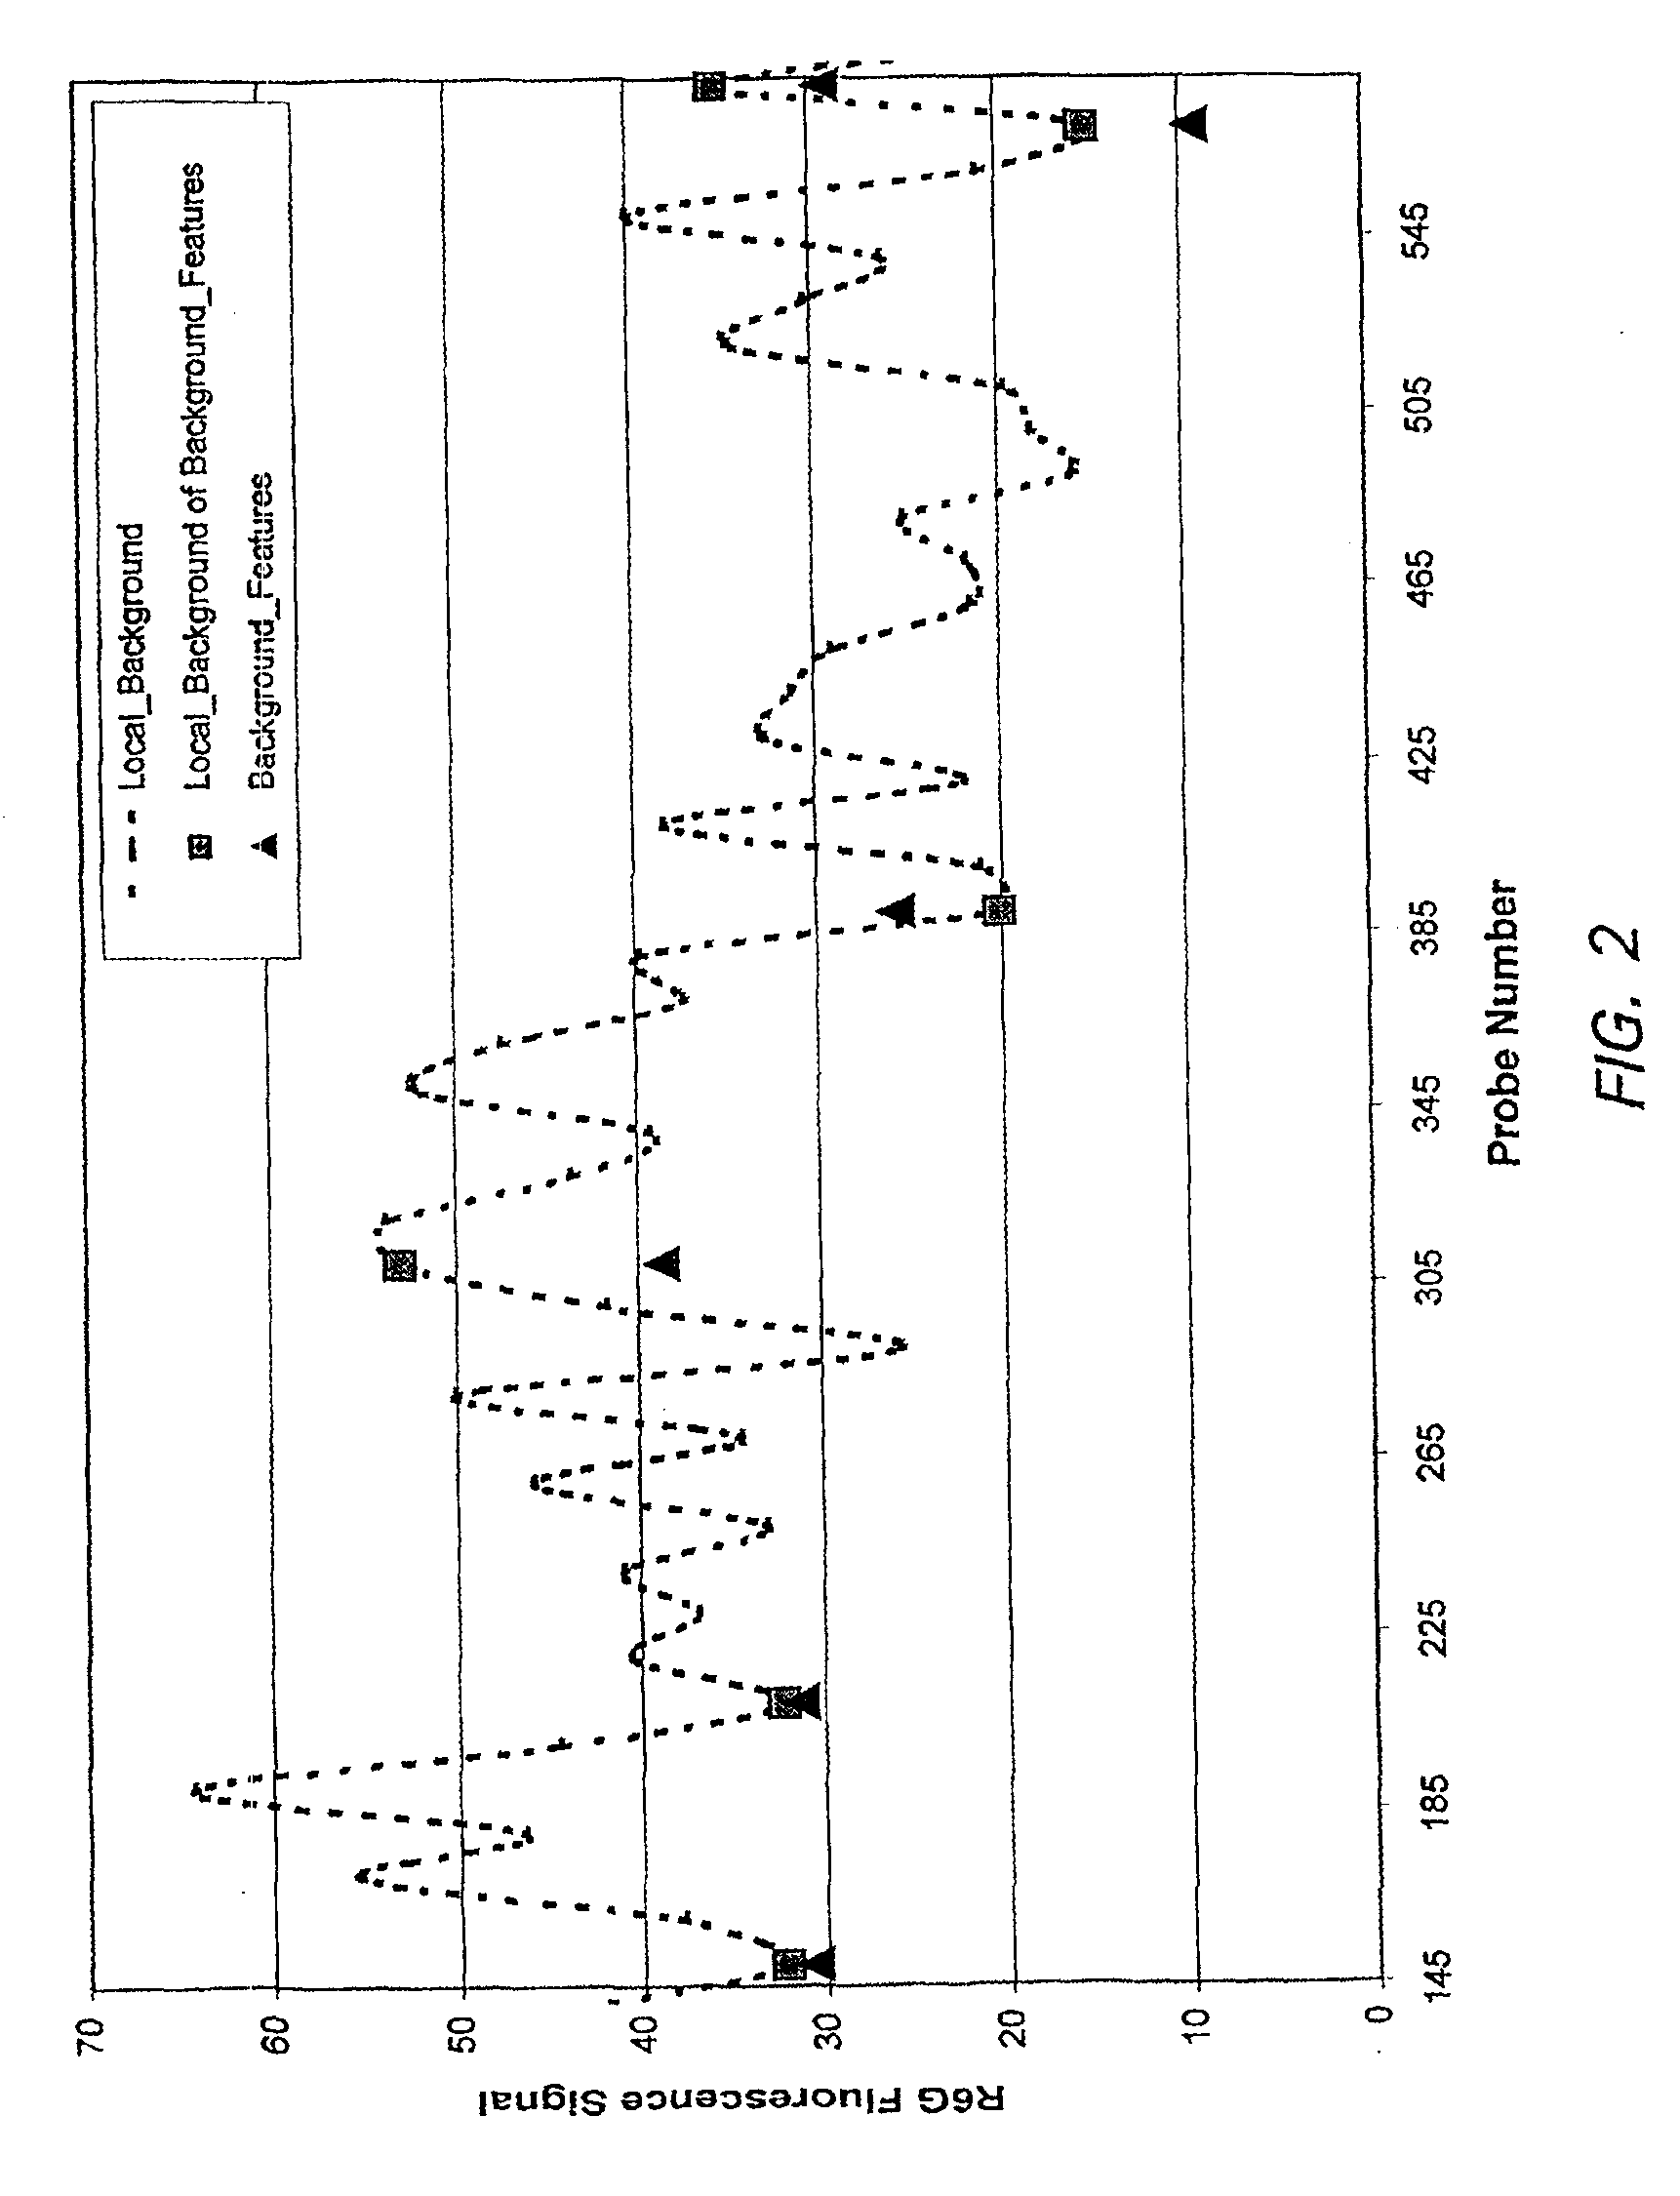 Arrays comprising background features that provide for a measure of a non-specific binding and methods for using the same